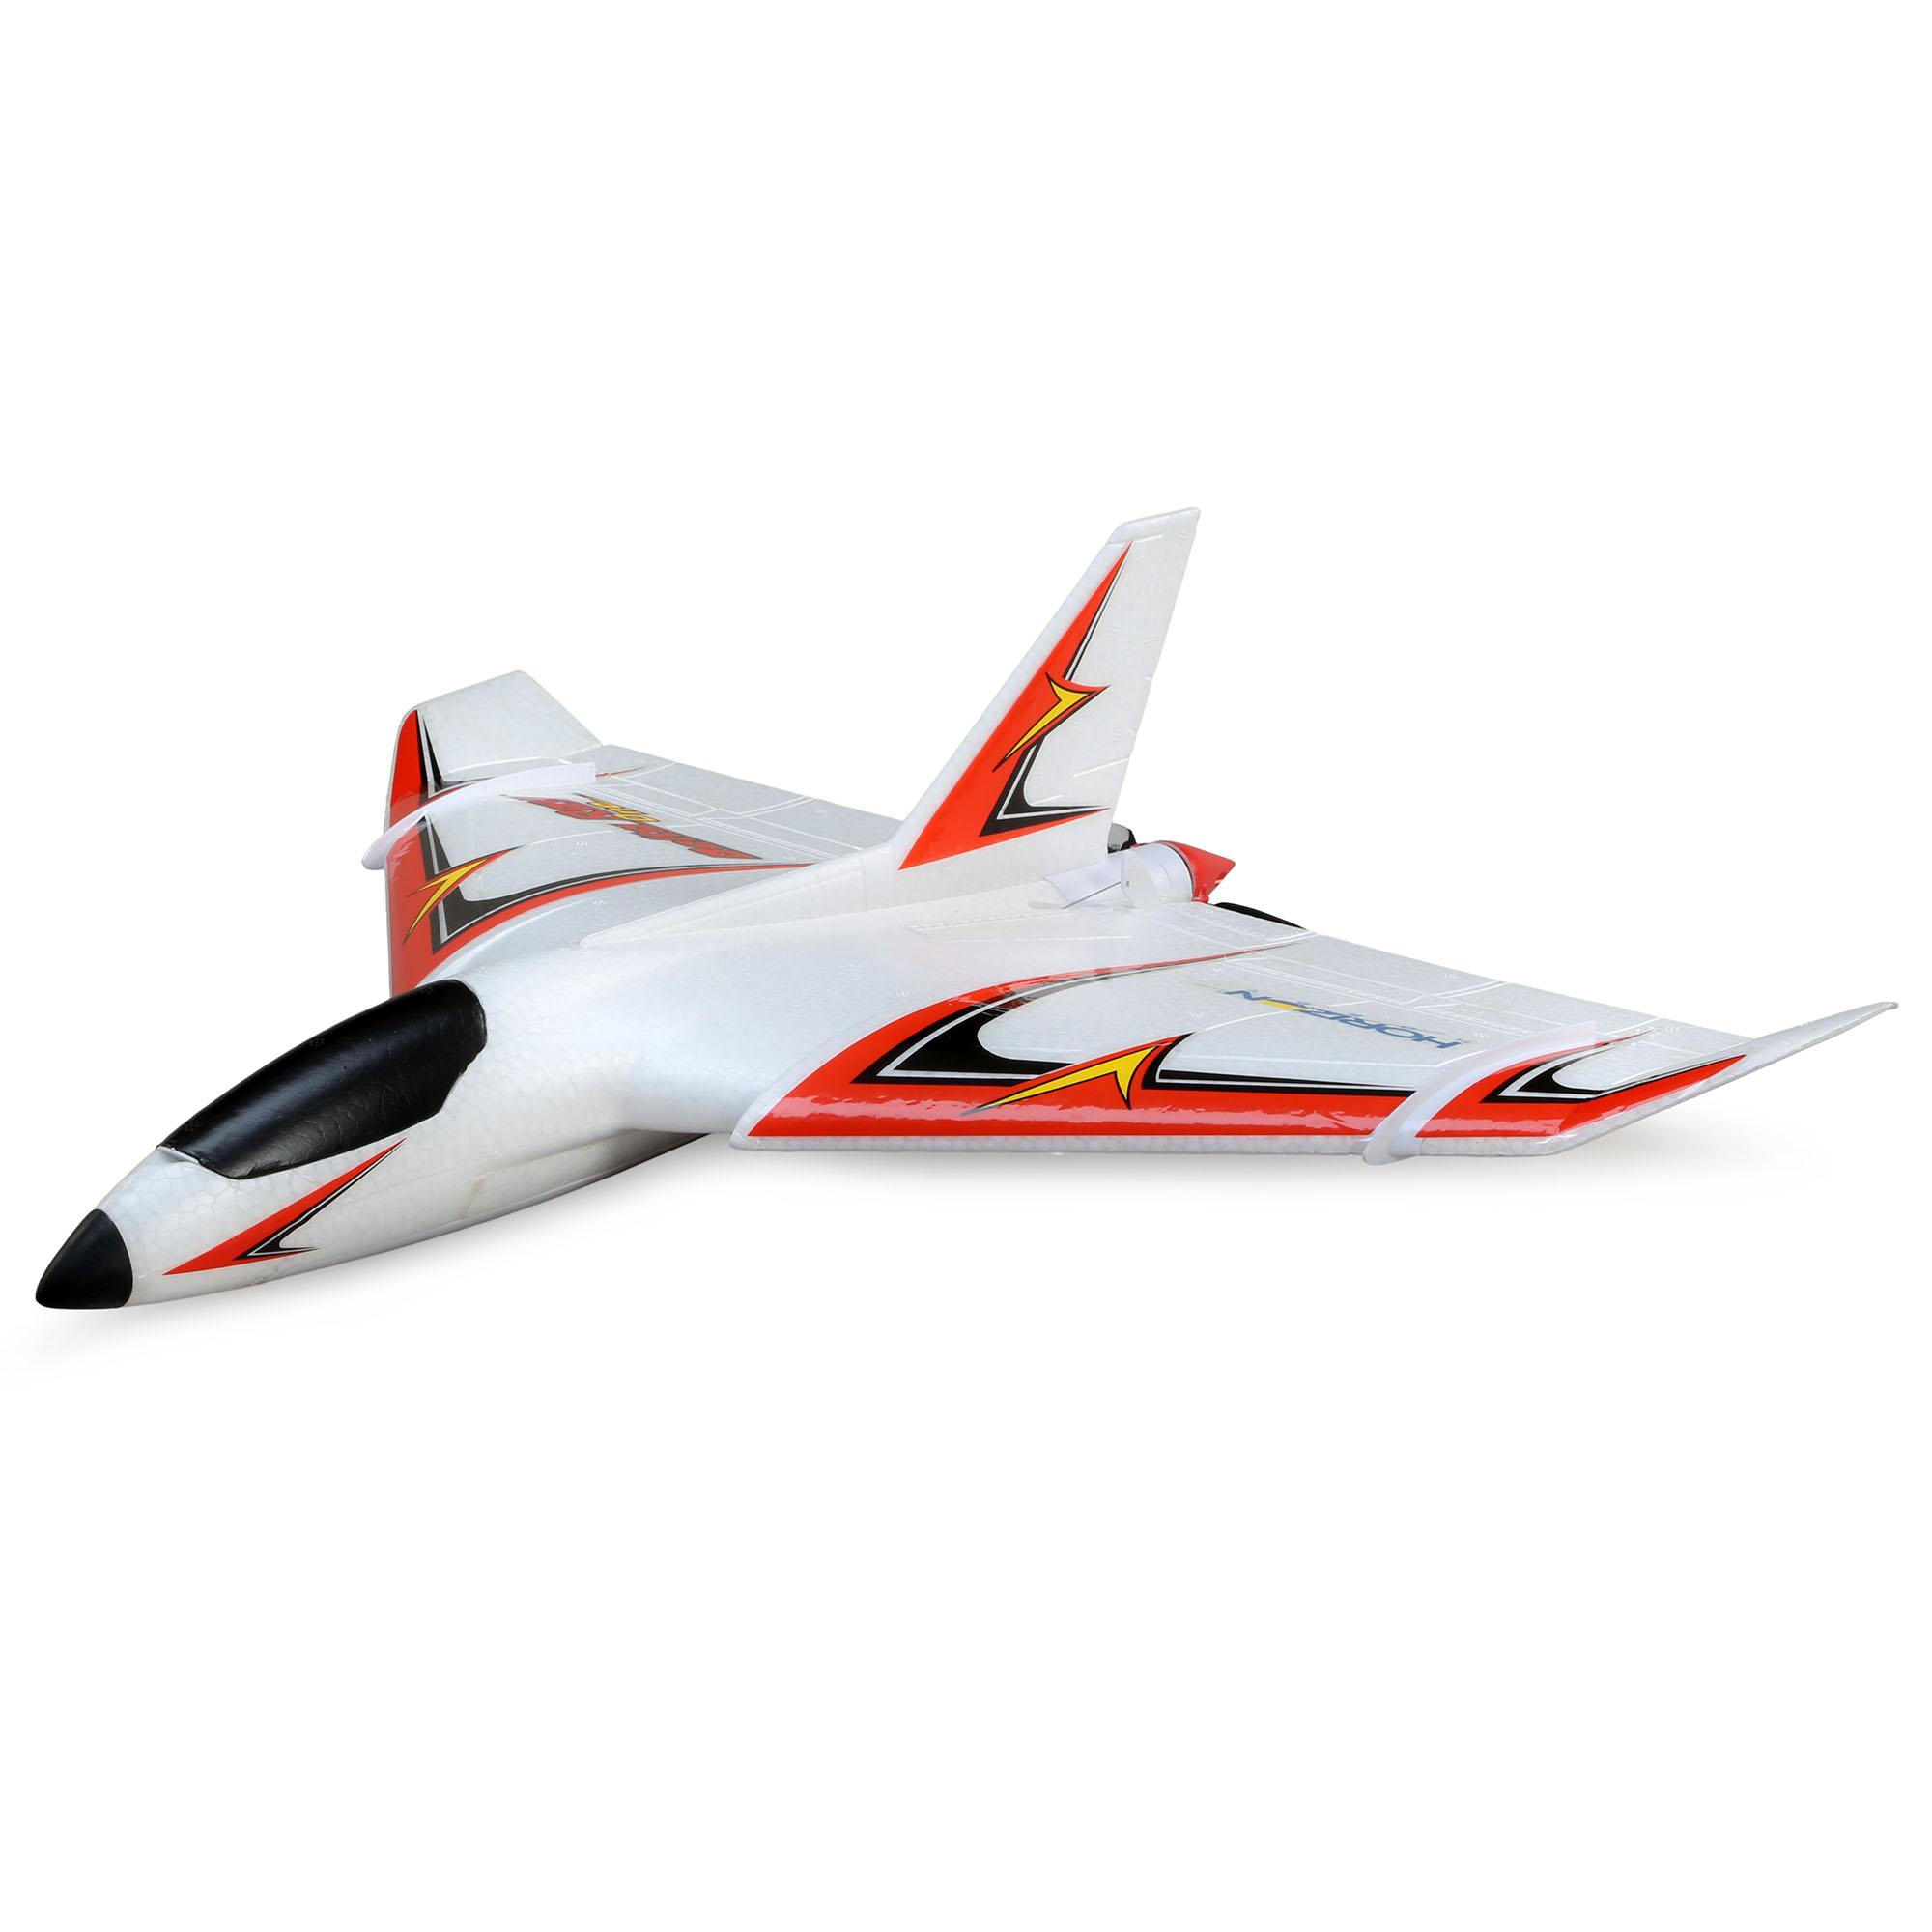 Delta Rc Airplane: Achieve ultimate performance with Delta RC airplanes